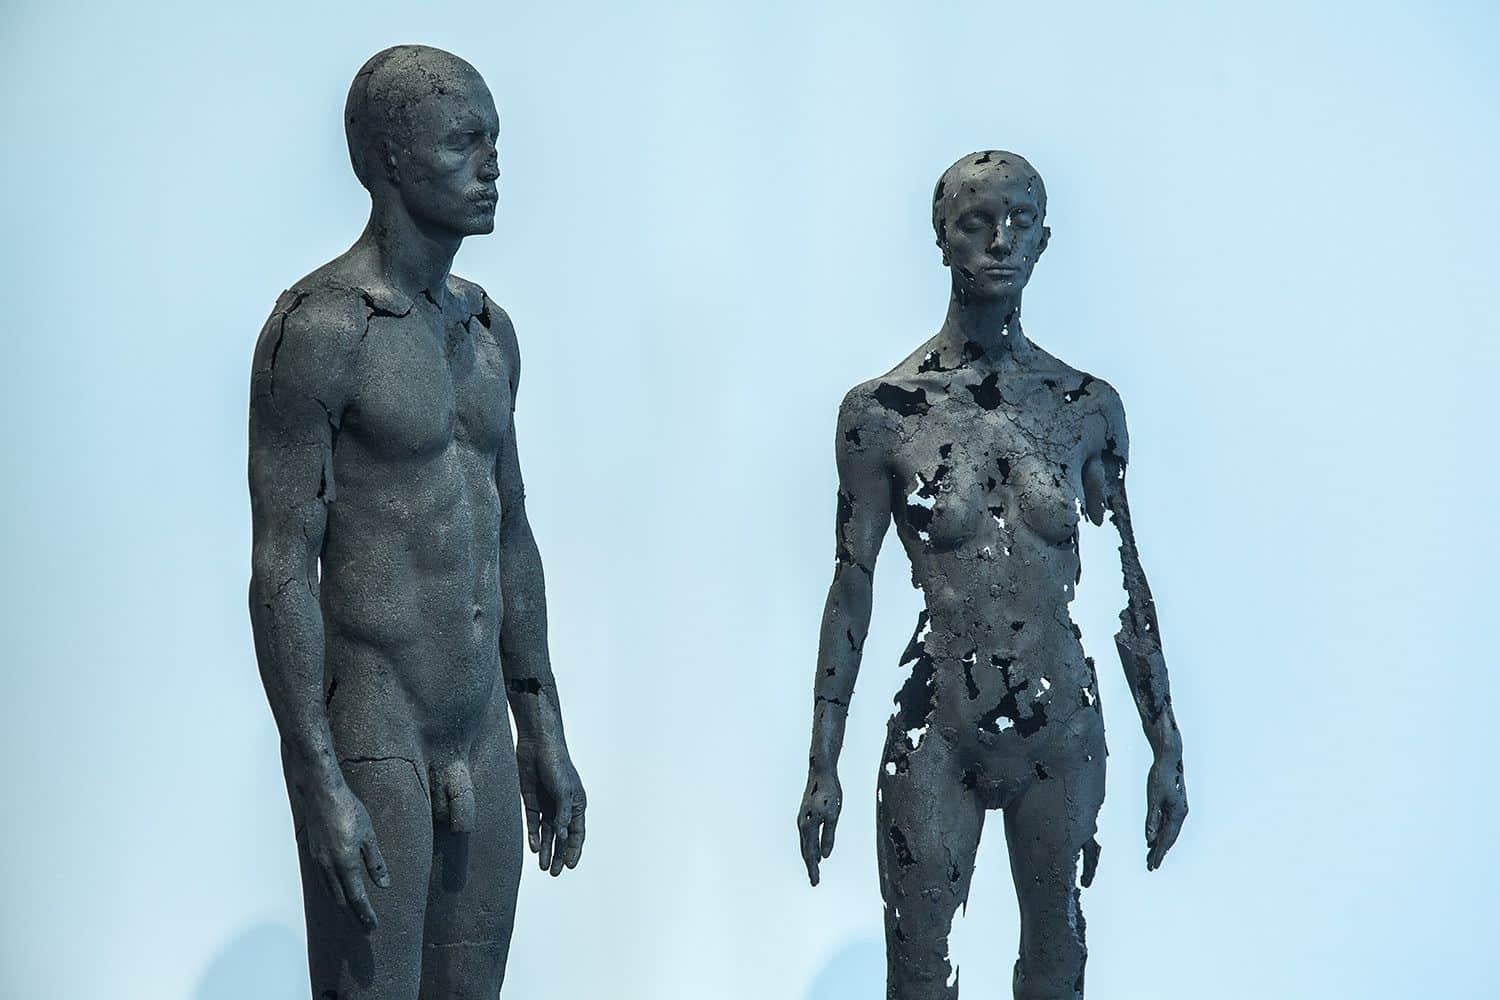 The Presence of Absence - Male (I) by Tom Price - Sculpture en charbon, corps nu en vente 2